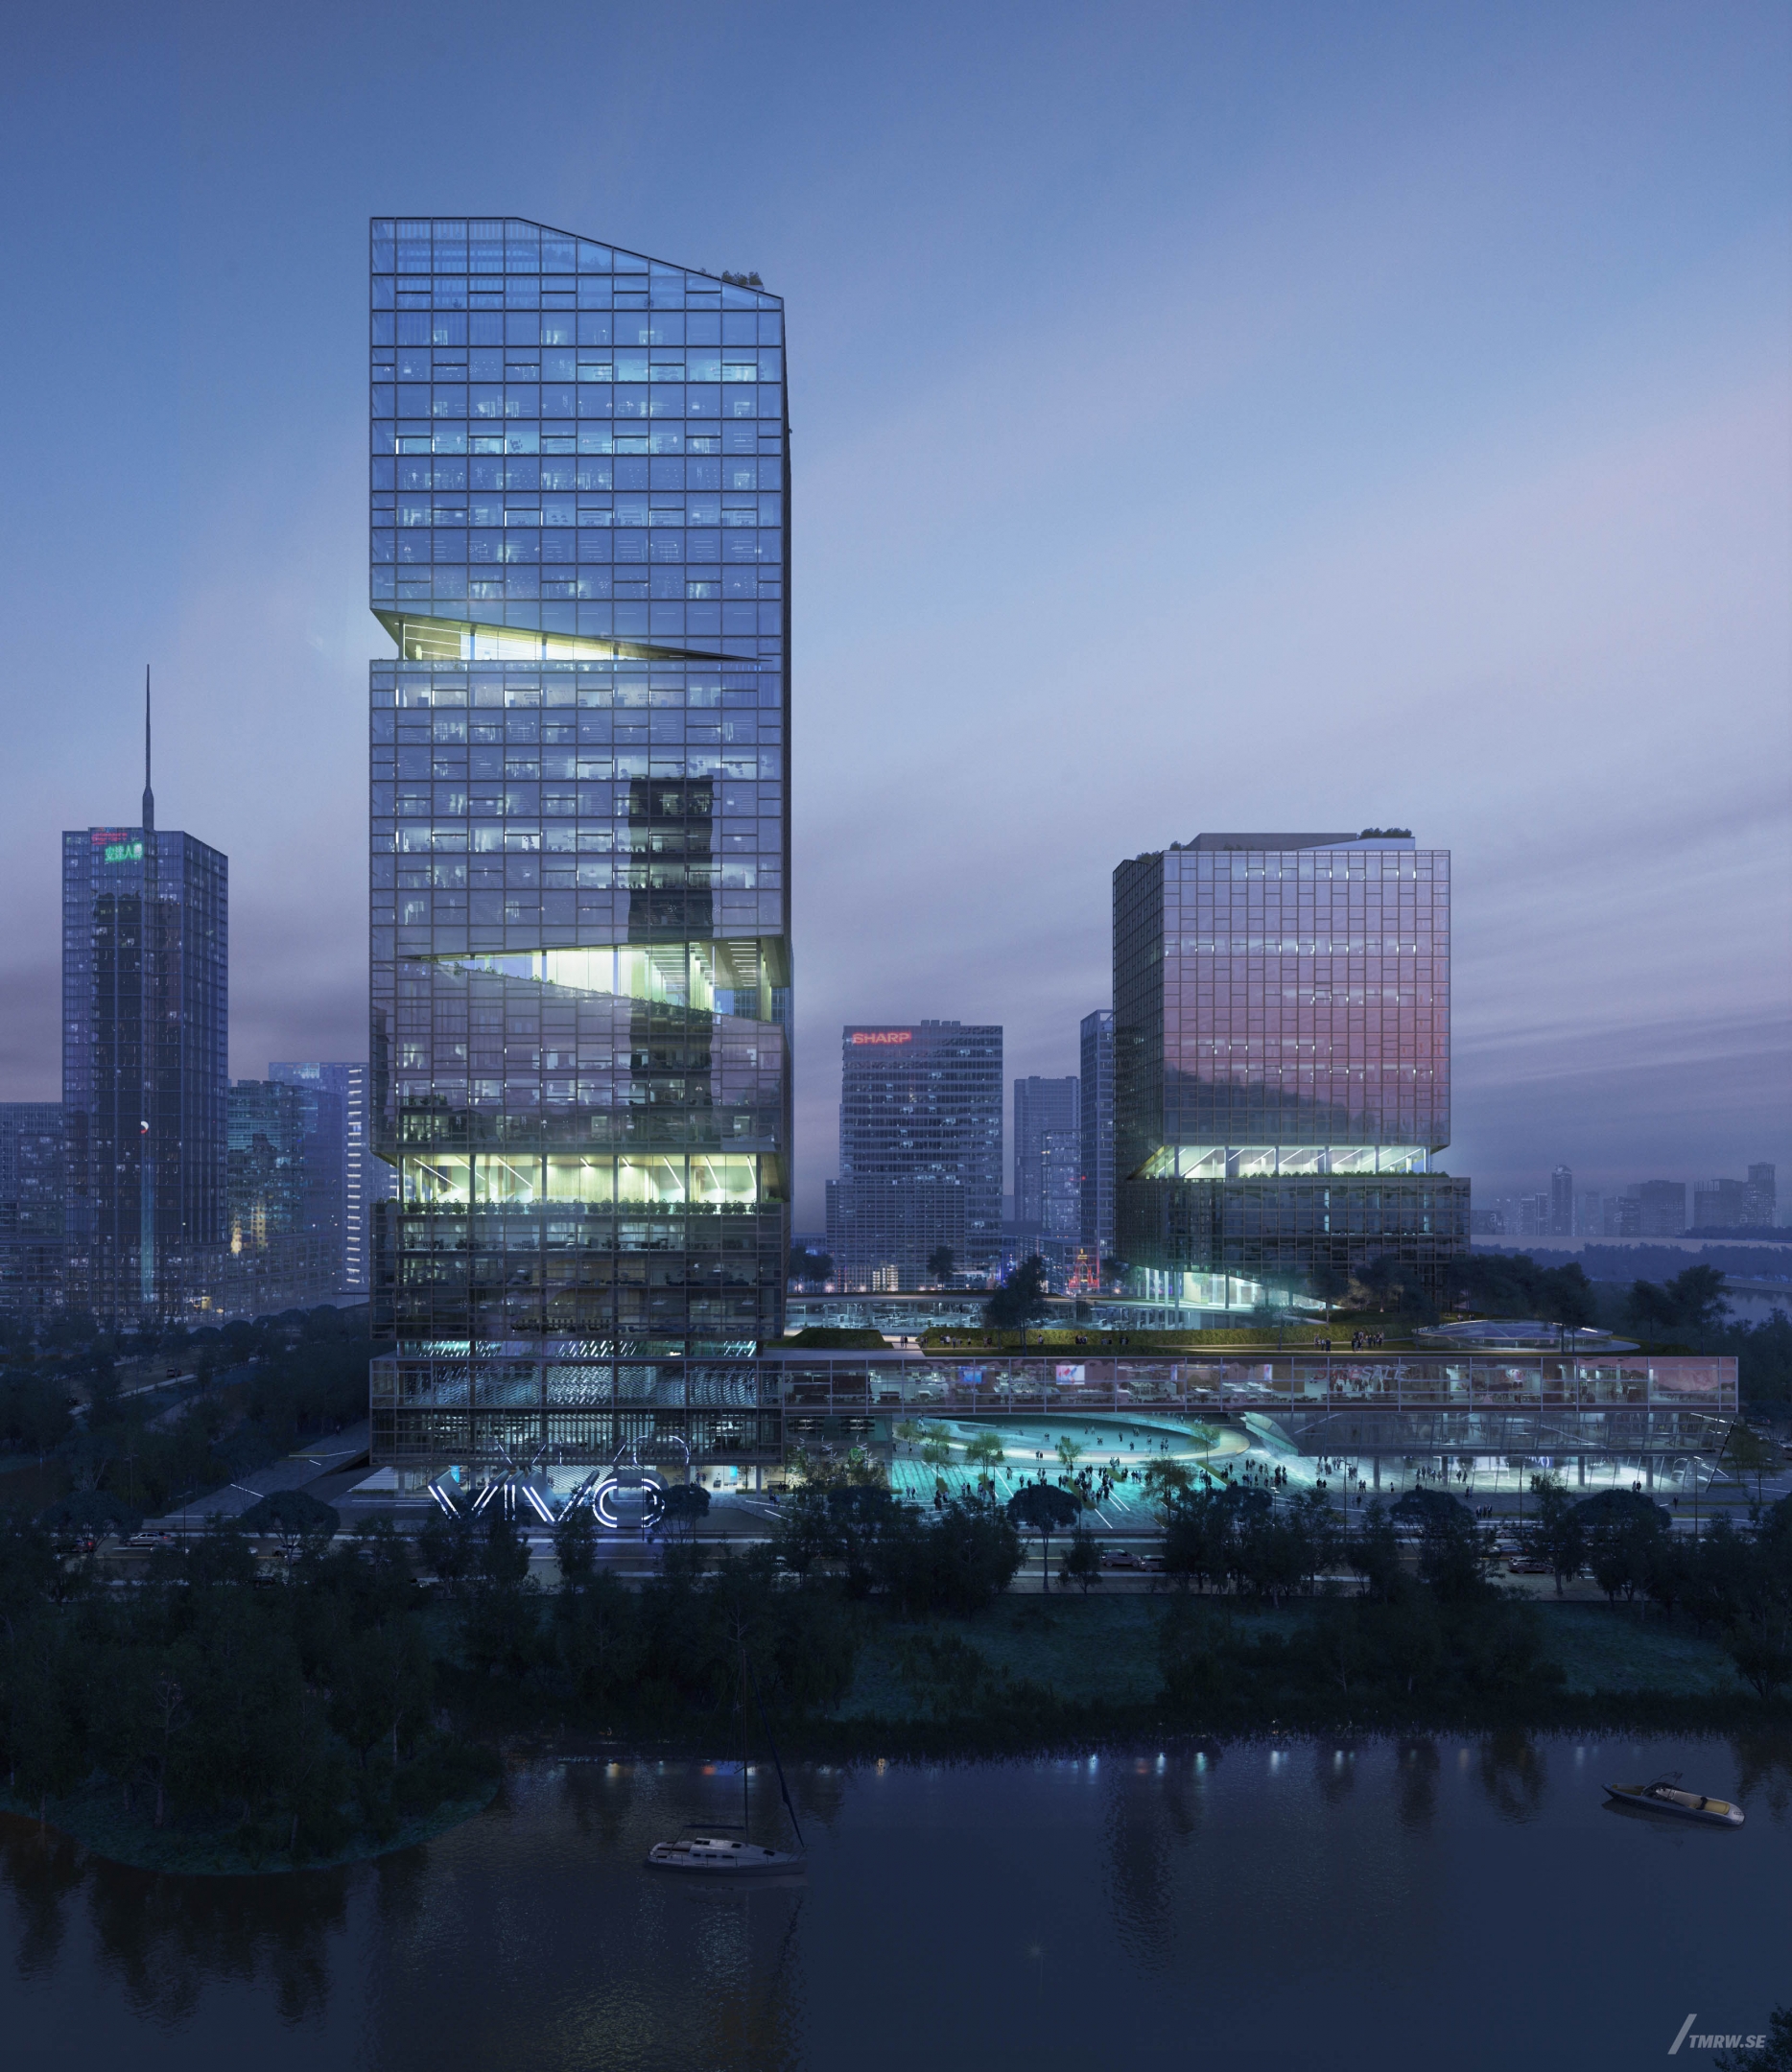 Architectural visualization of Hangzhou for NBBJ, an office tower during night from a street view.